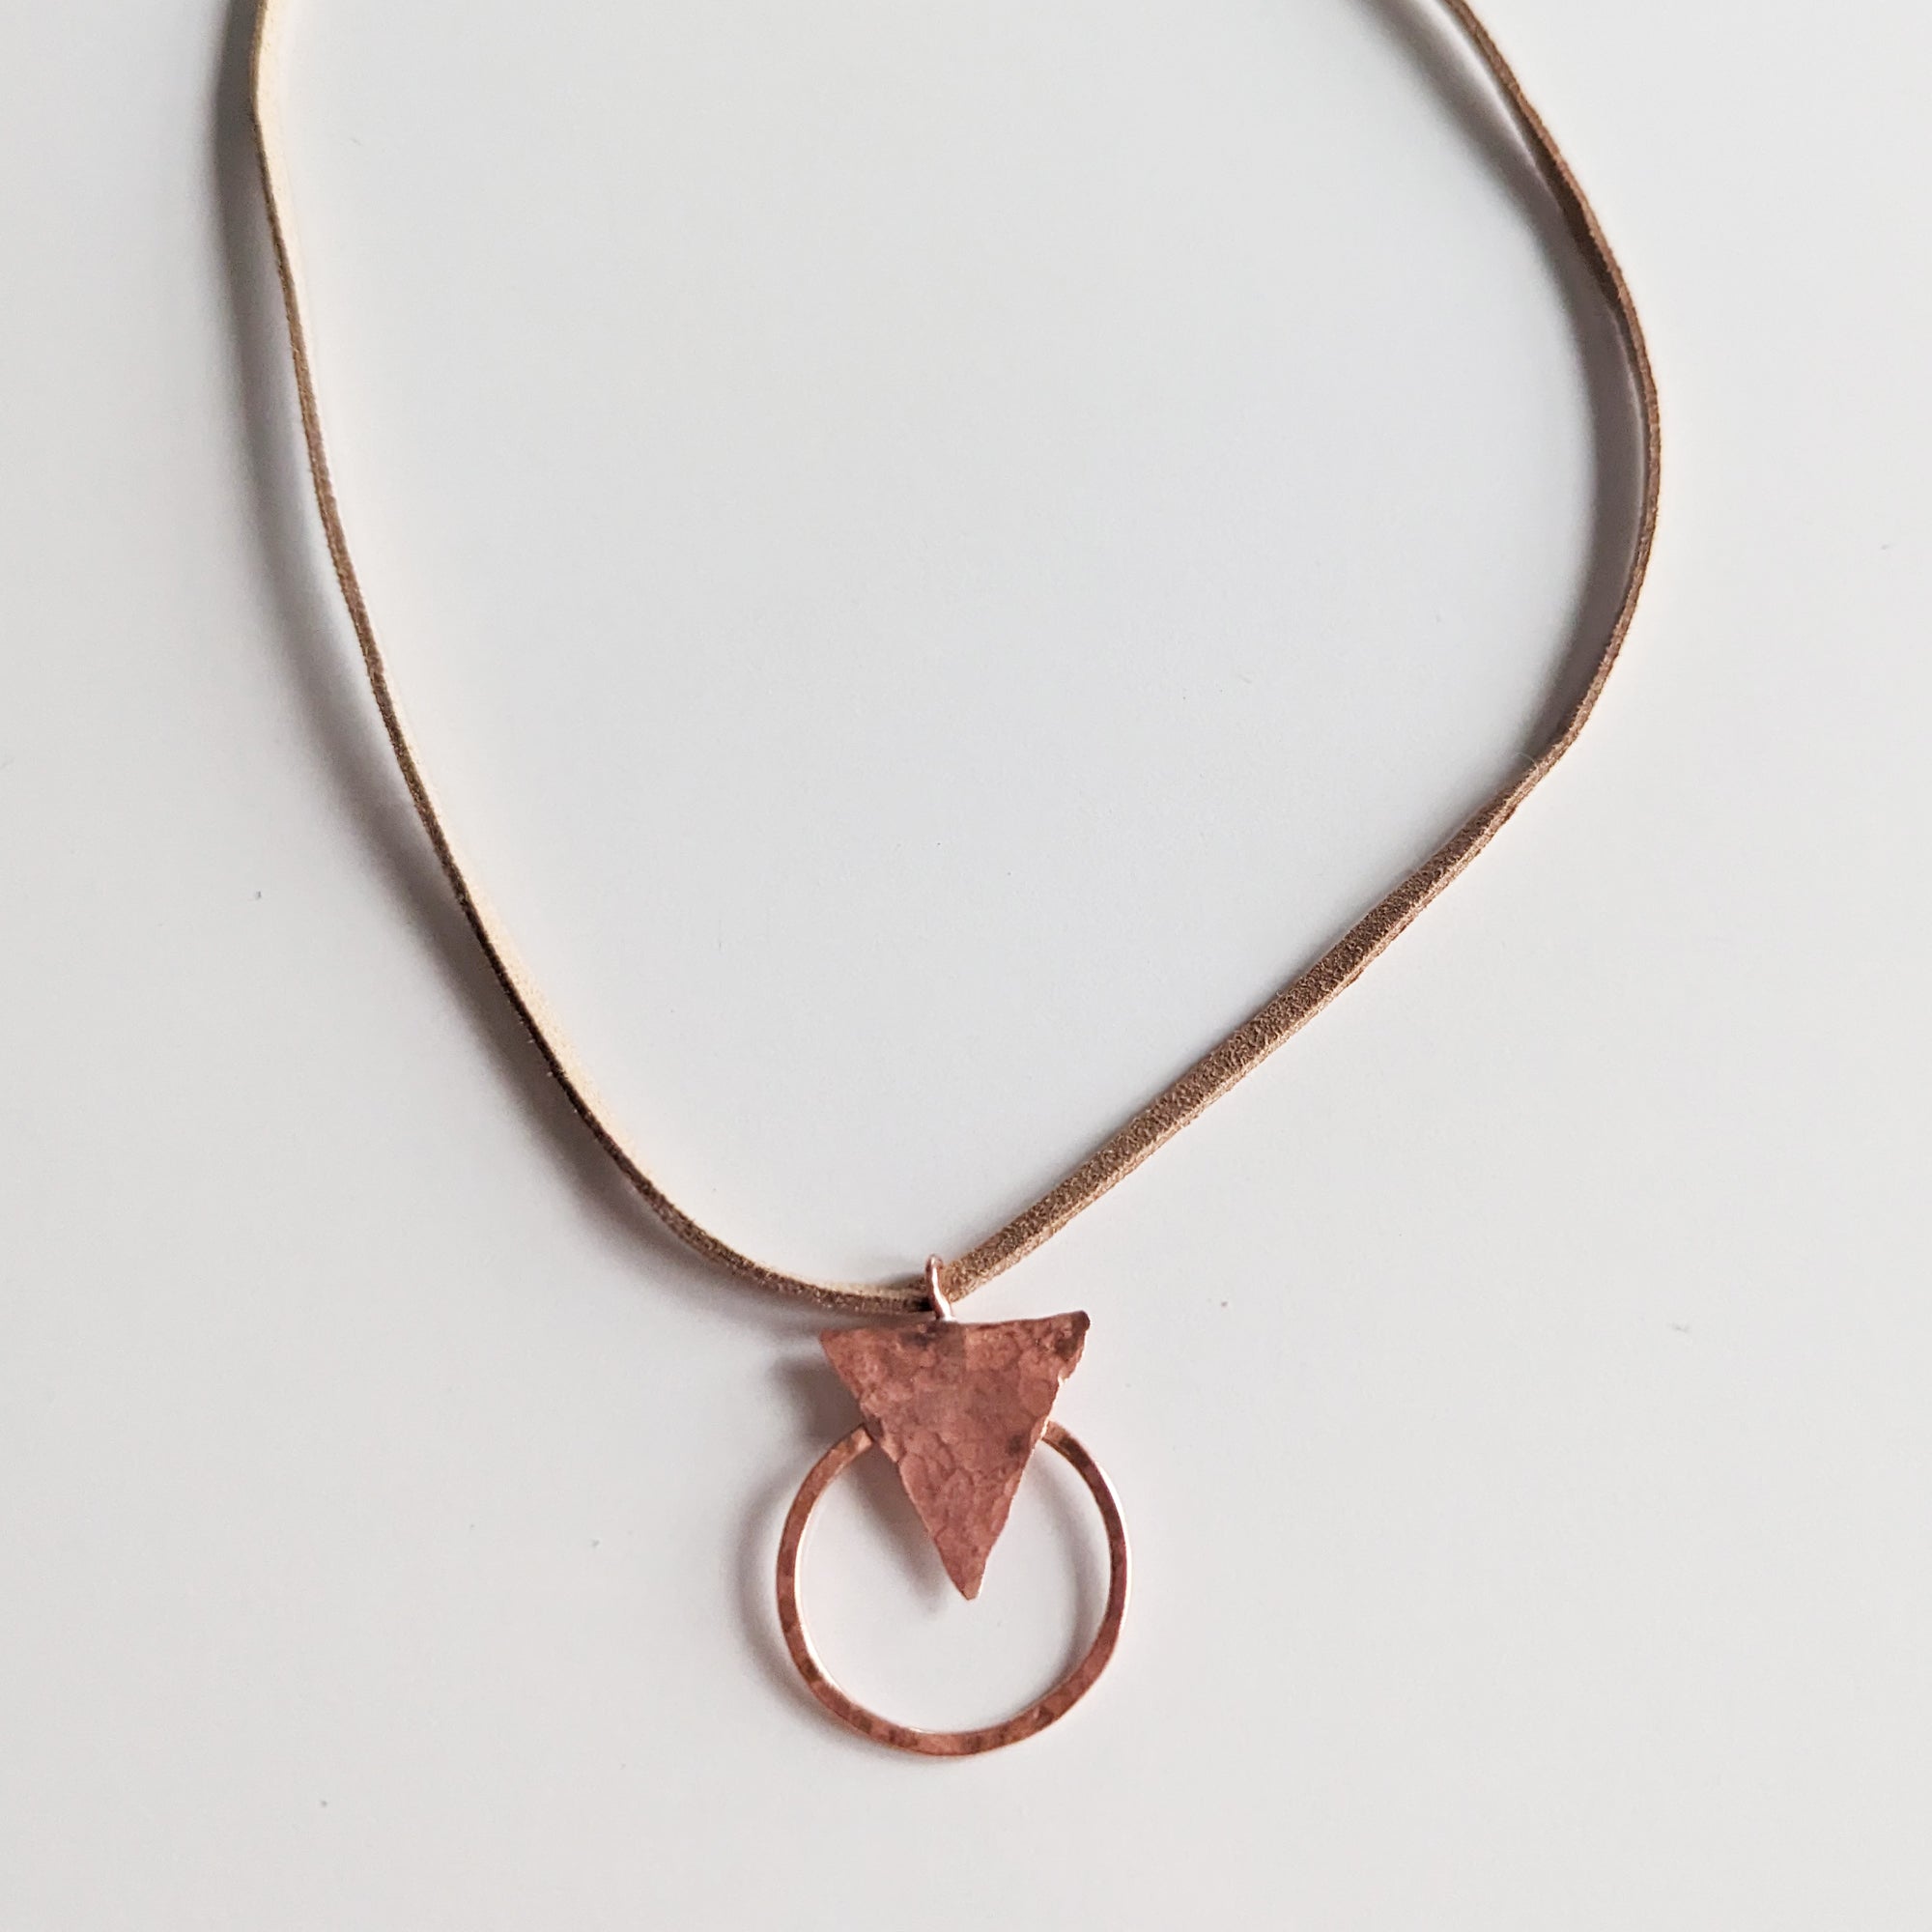 The Copper Triangle Hoop Necklace